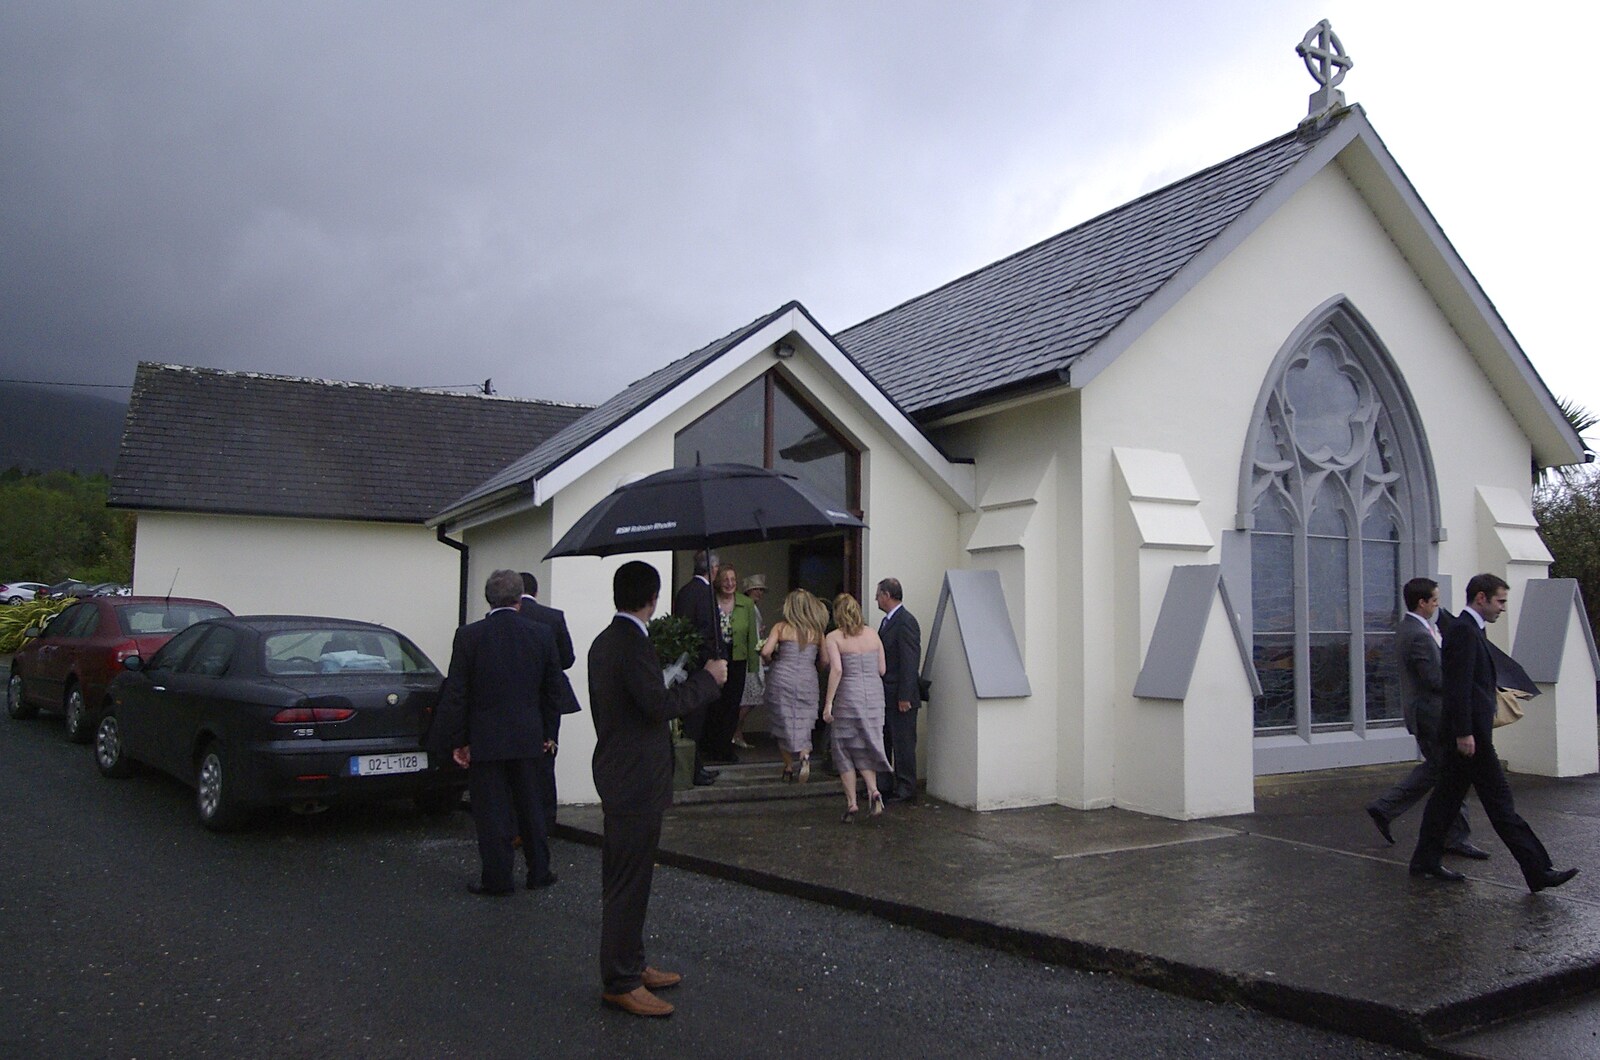 Paul and Jenny's Wedding, Tralee, County Kerry, Ireland - 3rd May 2008: A church in the rain